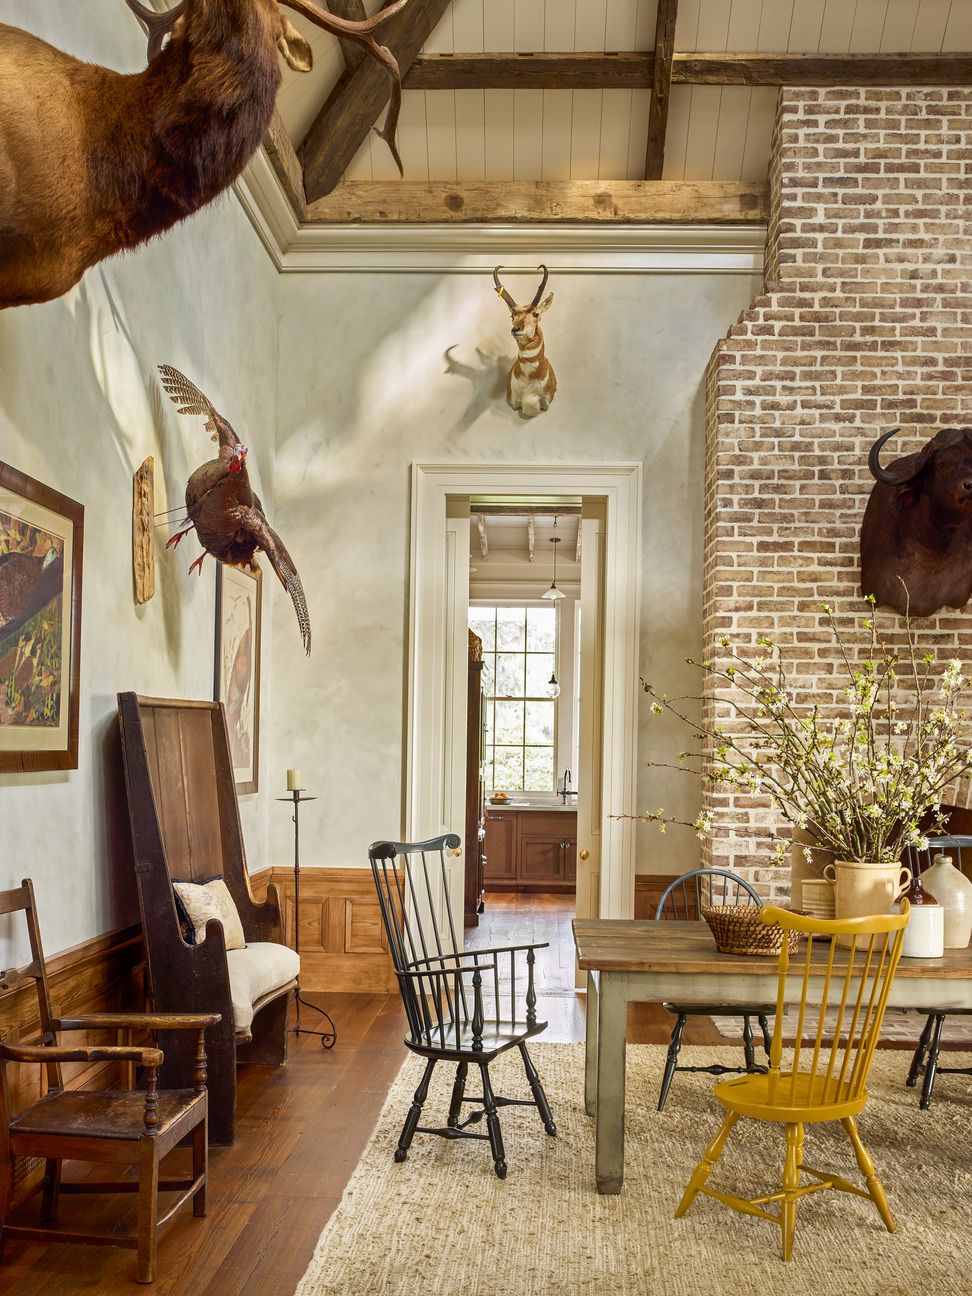 Displaying Dishes, Farmhouse Style! - Town & Country Living